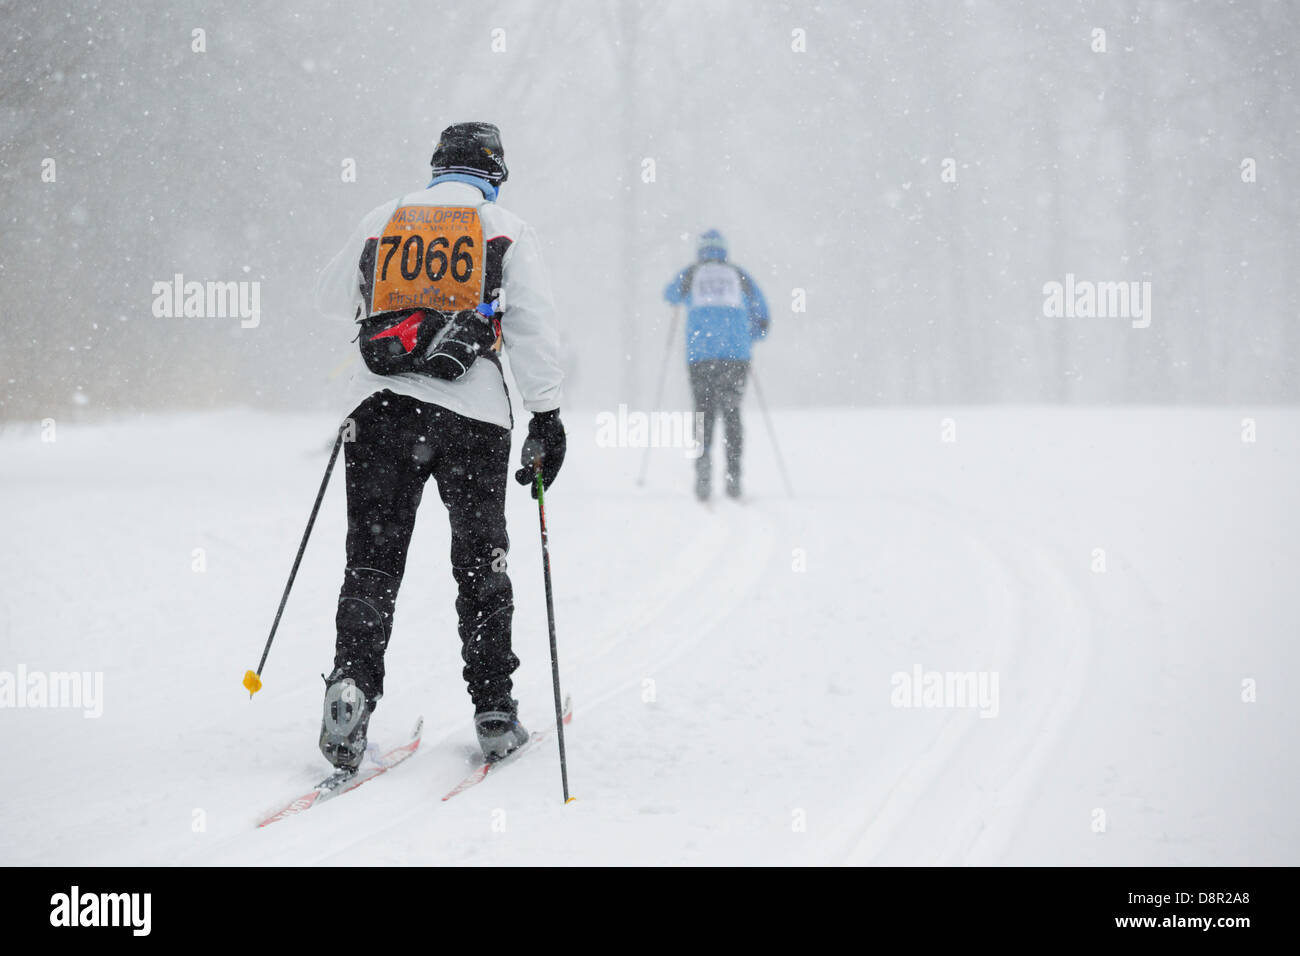 Competitors ski in the Mora Vasaloppet during a snowstorm on February 10, 2013 near Mora, Minnesota. Stock Photo